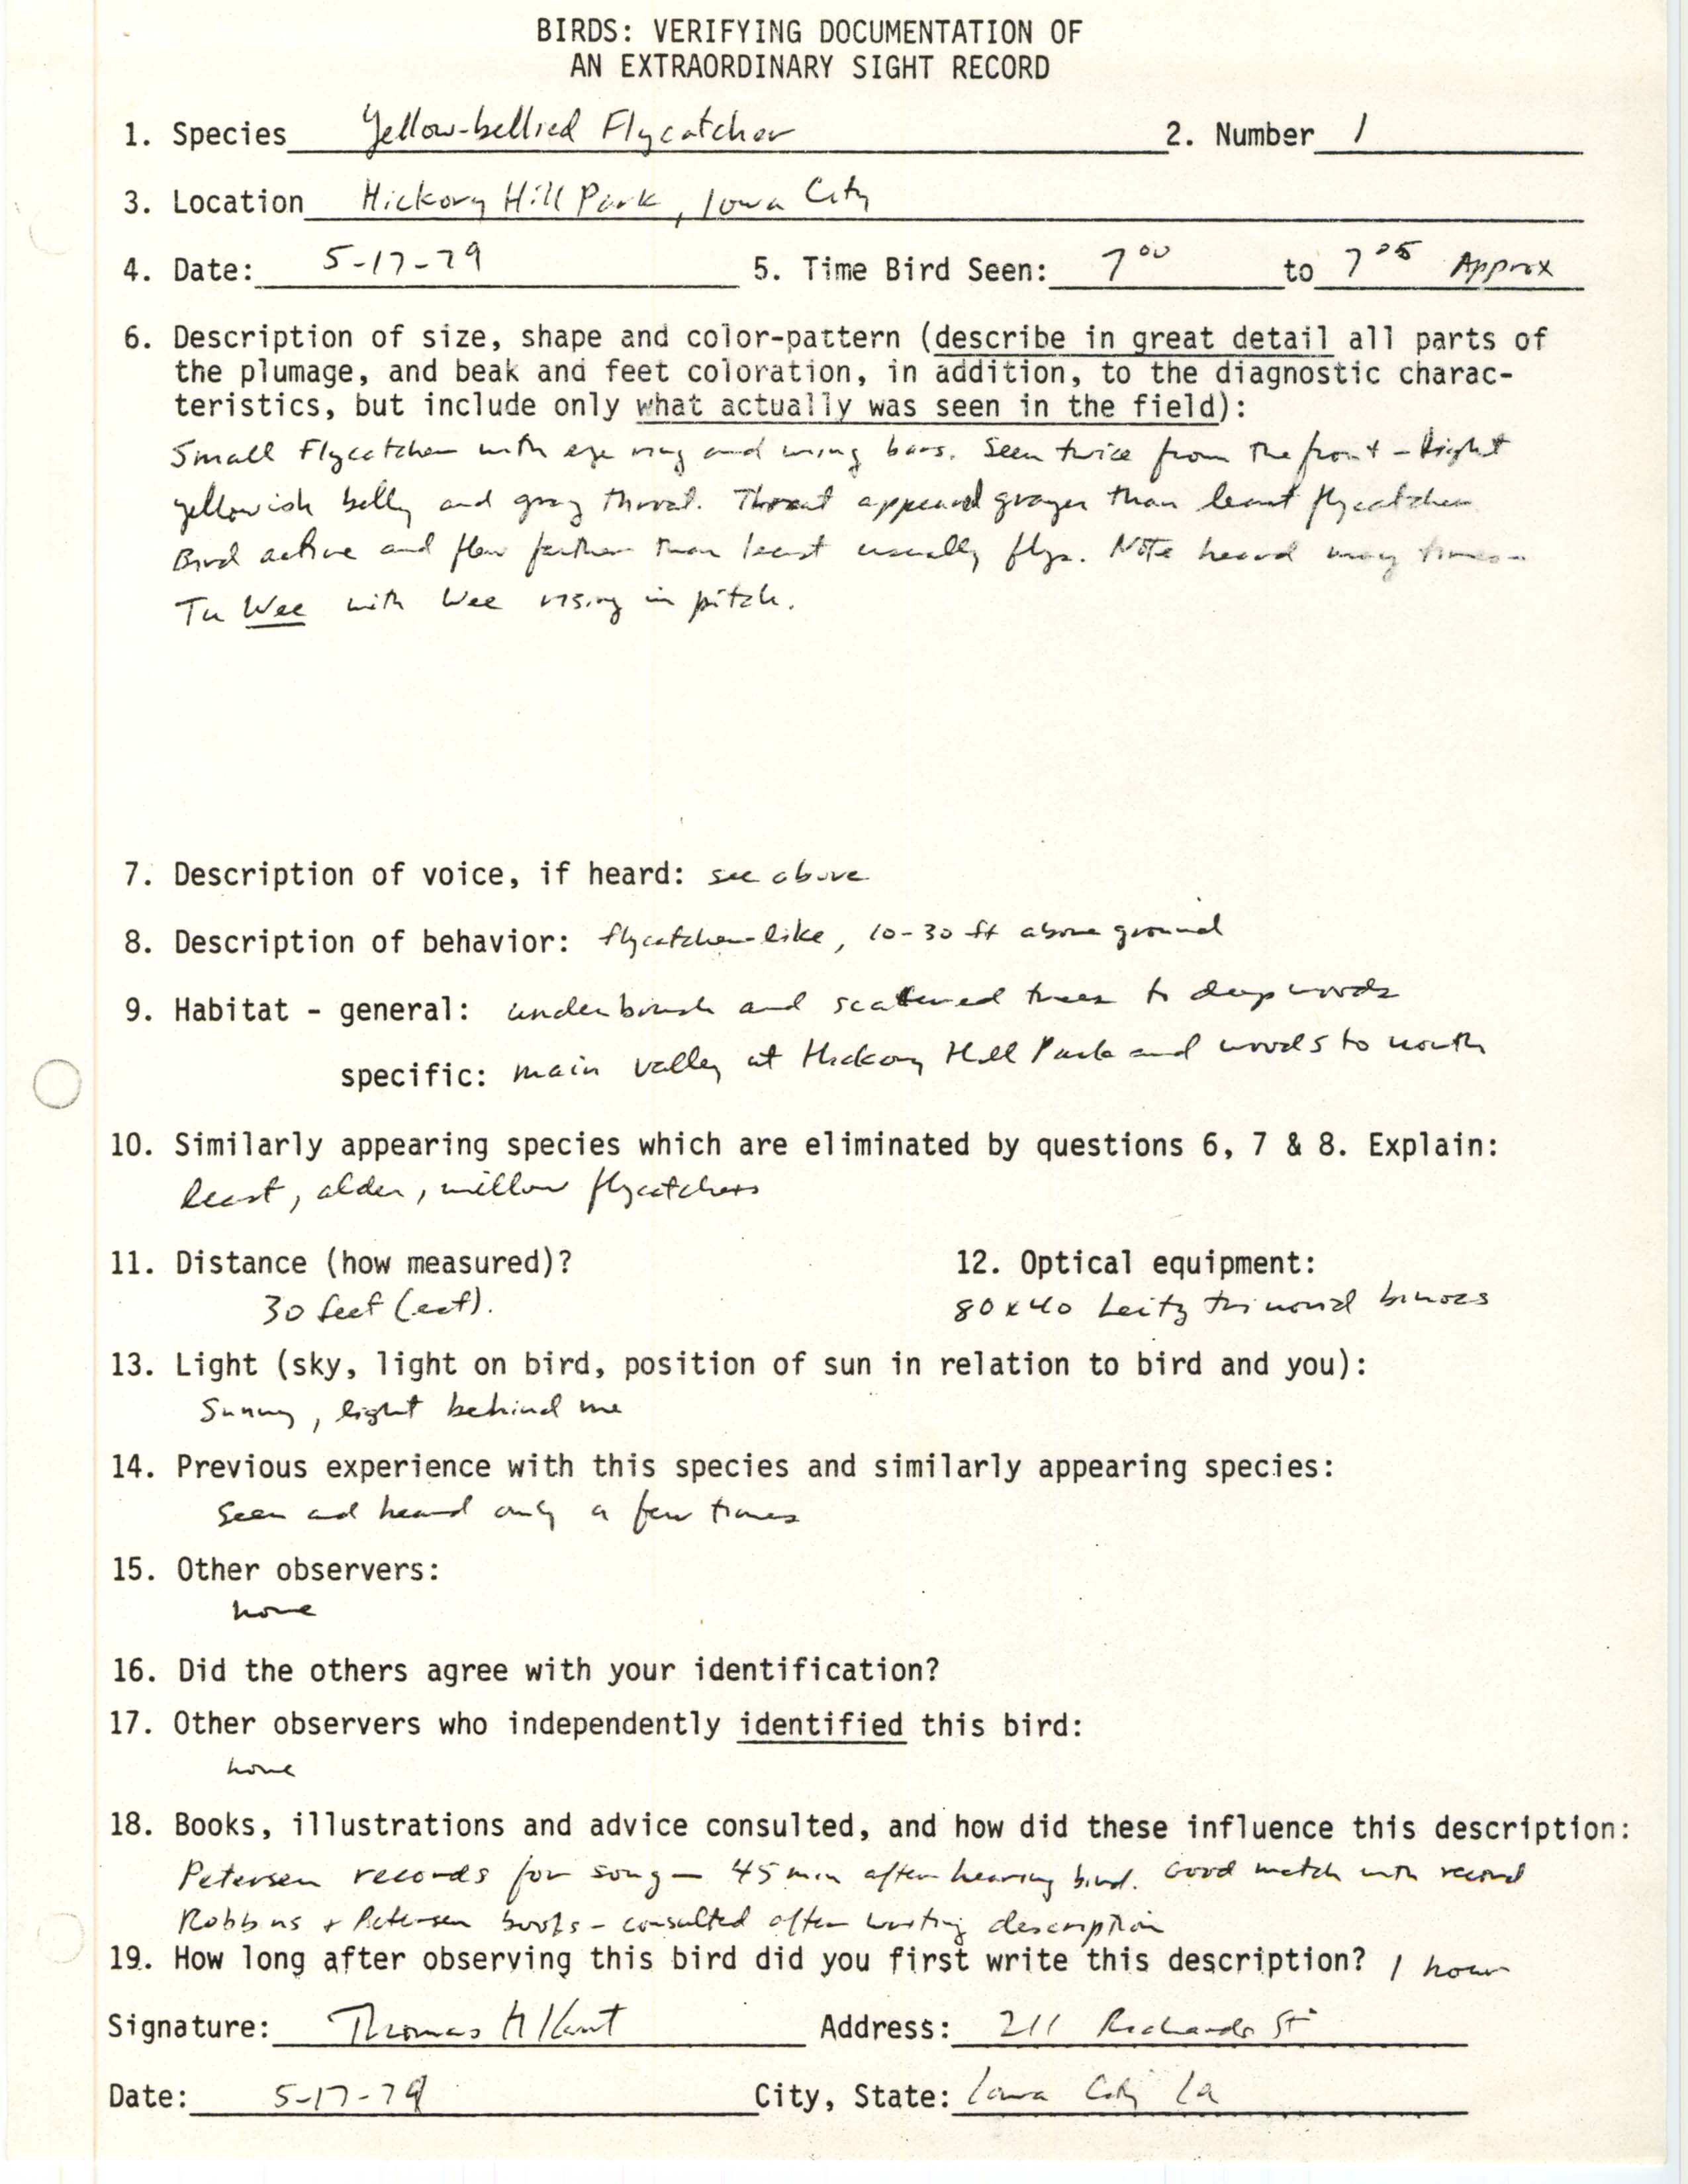 Rare bird documentation form for Yellow-bellied Flycatcher at Hickory Hill Park, 1979